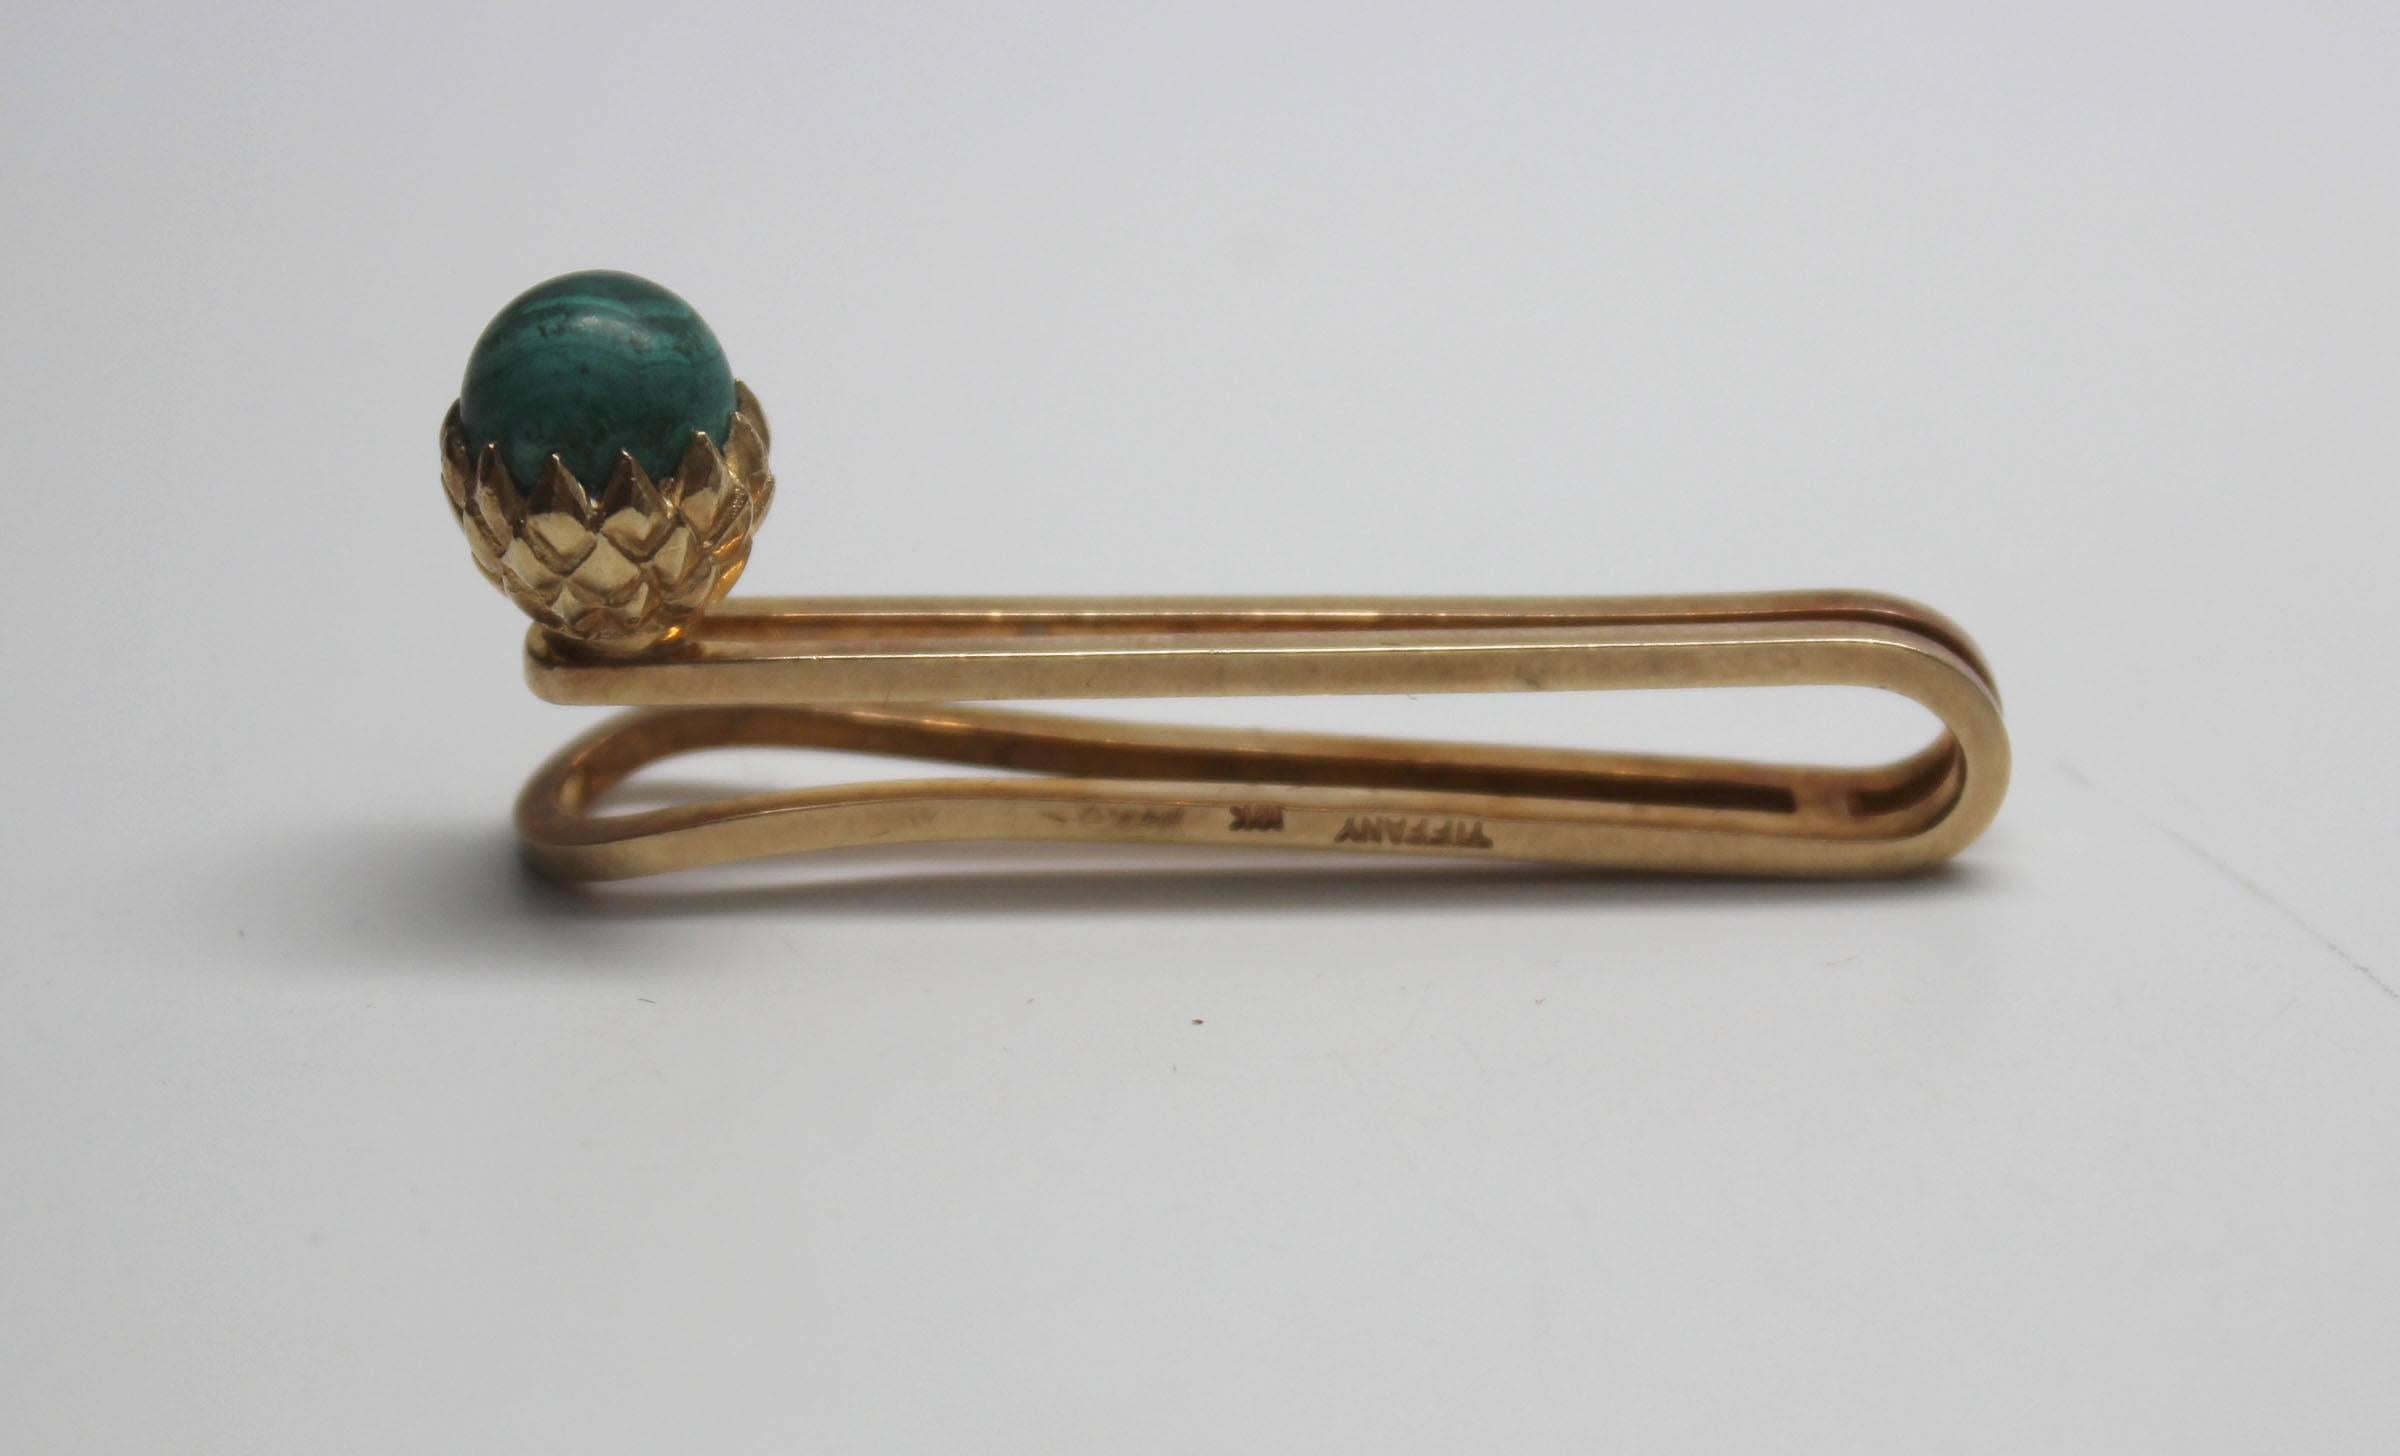 This is a rare vintage 18 Carat gold tie bar with malachite stone designed by Jean Schlumberger for Tiffany & Co. Jean Schlumberger worked for Elsa Schiaparelli creating jewelry for her collections until he was hired by Tiffany in 1956. He was